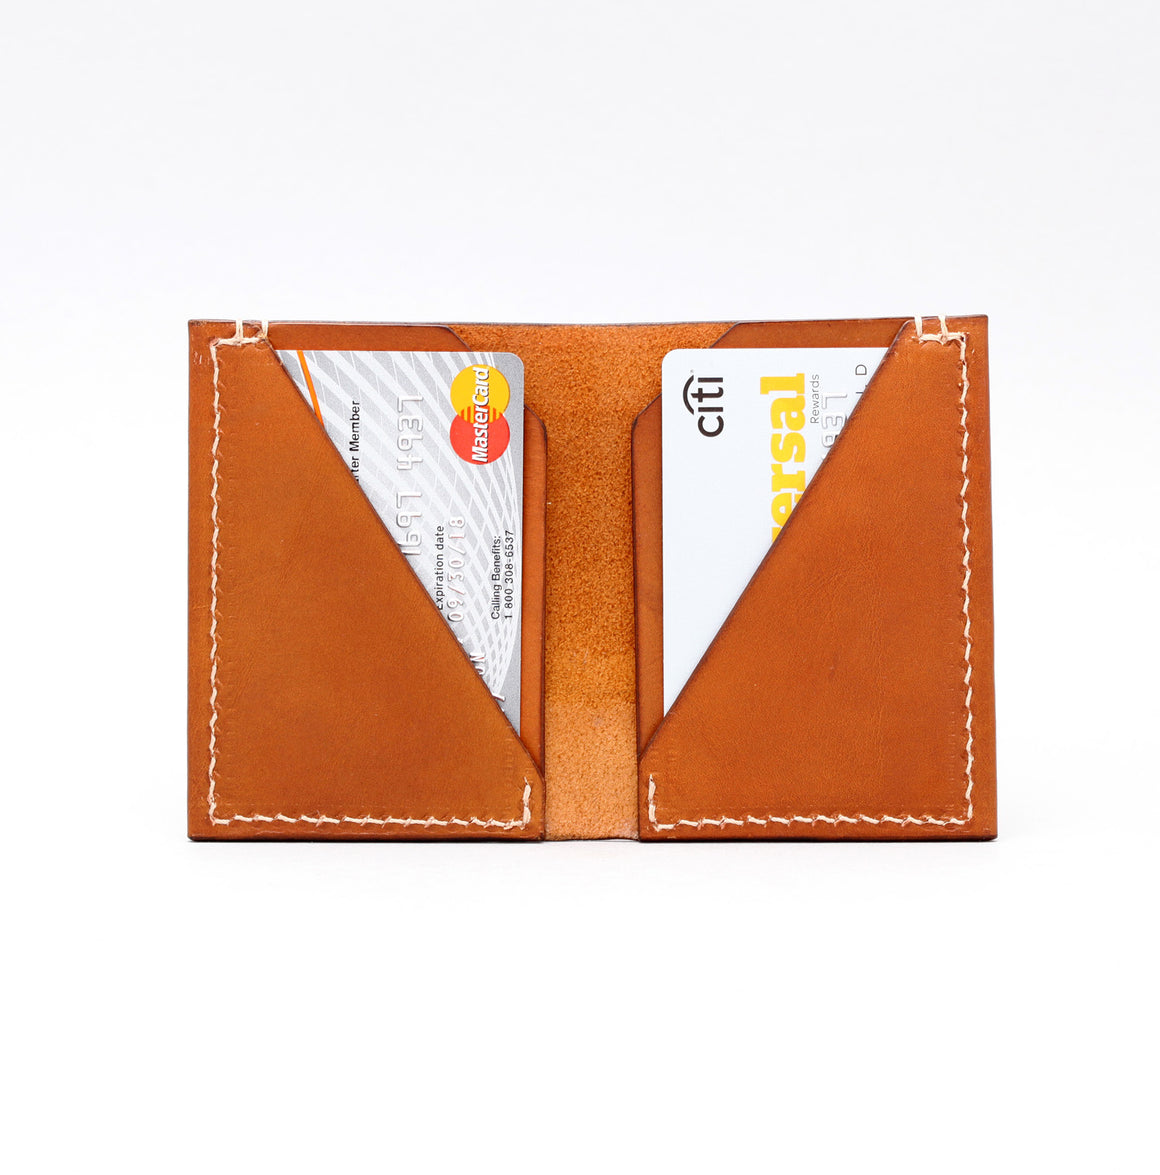 DOUBLE POCKET FOLD WALLET IN NATURAL